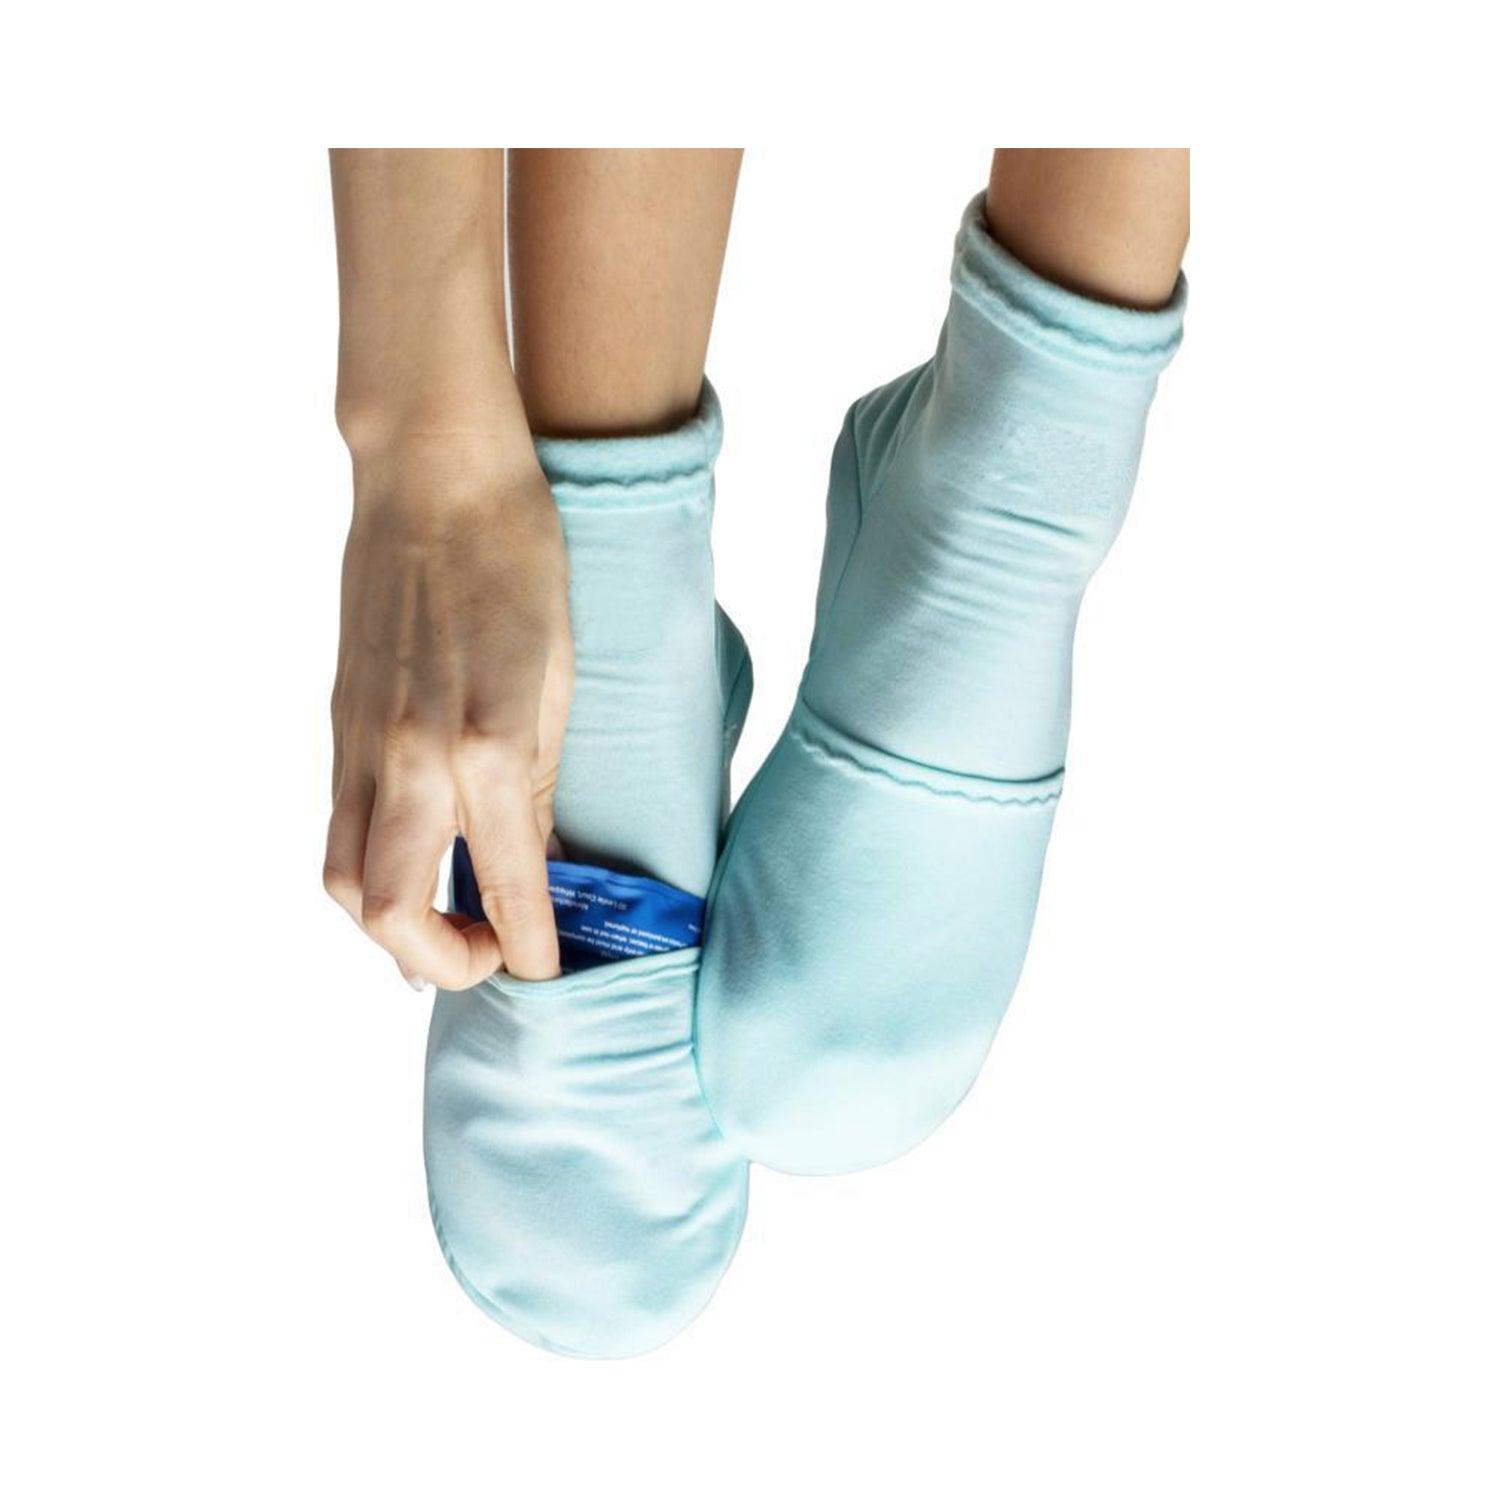 Extra Gel Packs for Cold Therapy Socks | NatraCure